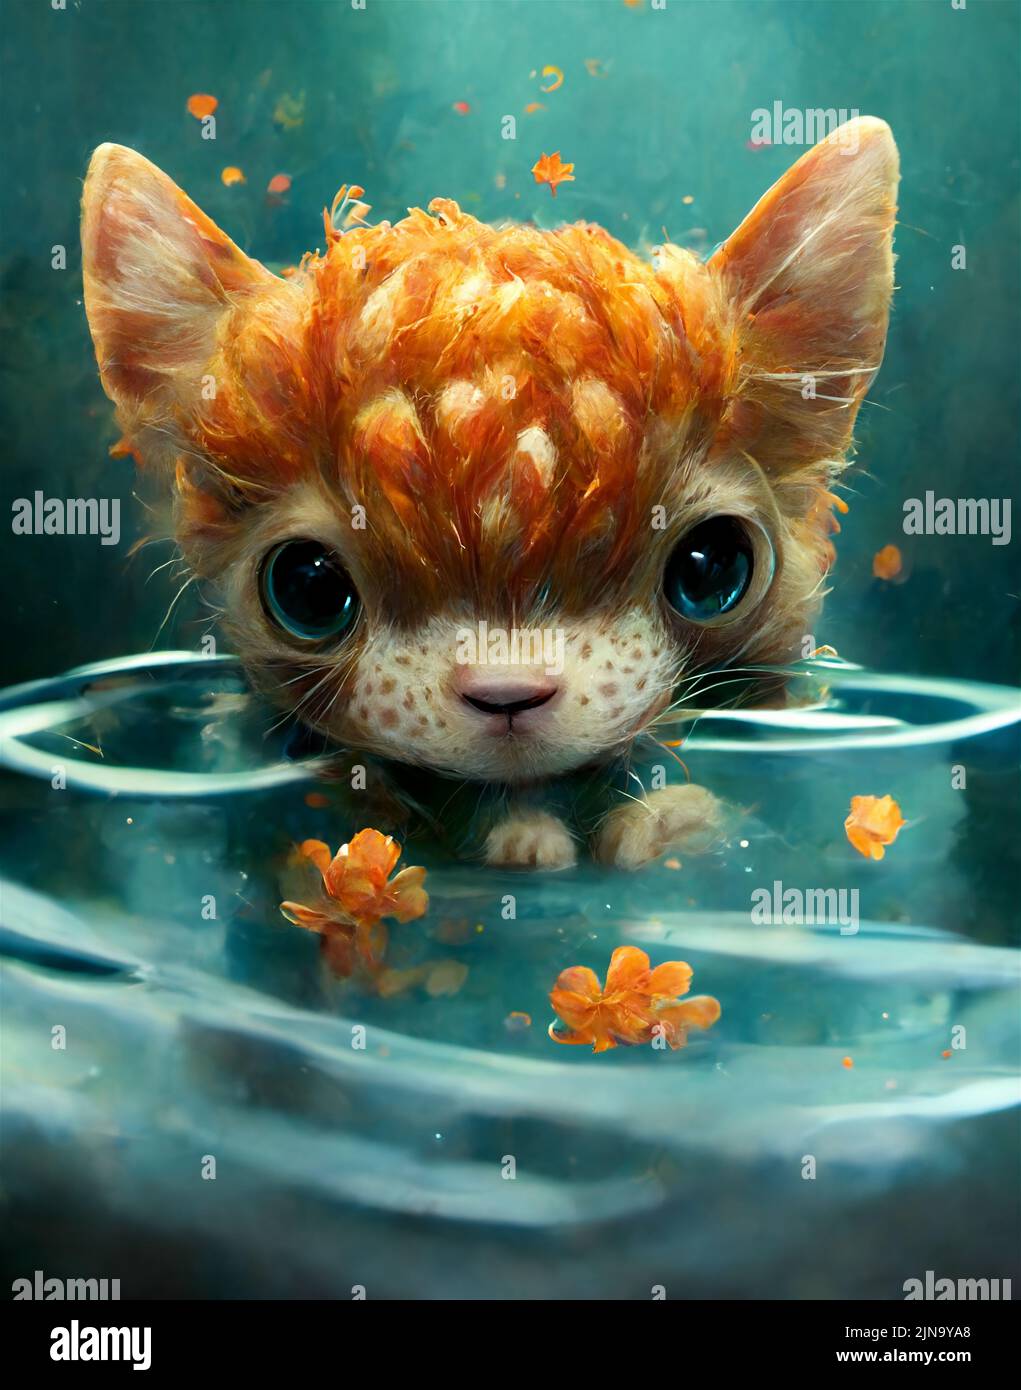 Cute ginger cat in water, abstract background picture, close up Stock Photo